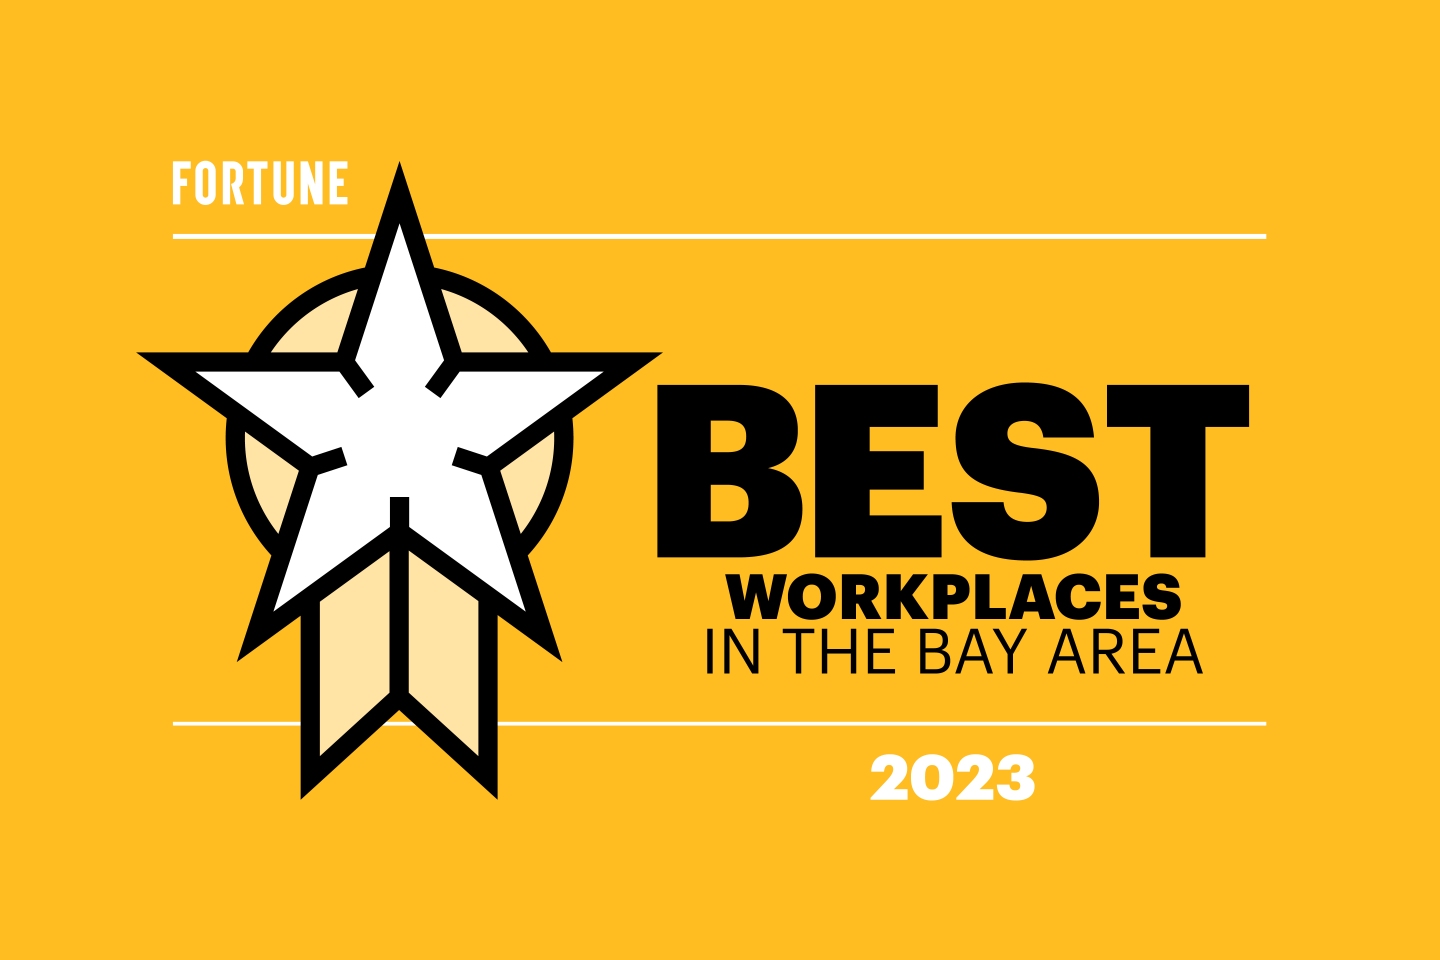 75 Best Small and Medium Workplaces in the Bay Area